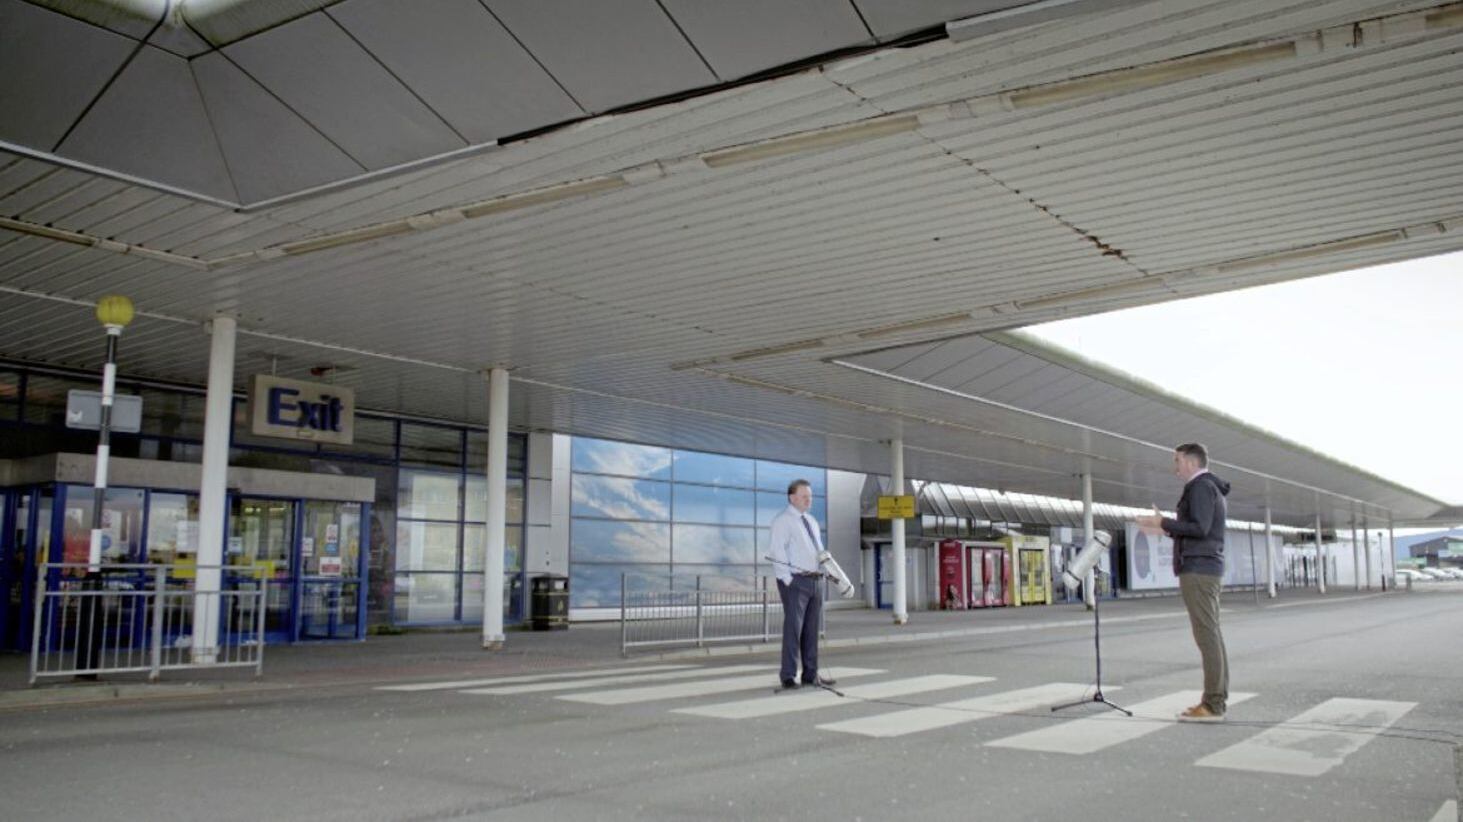 Belfast International Airport will benefit from a business rates holiday